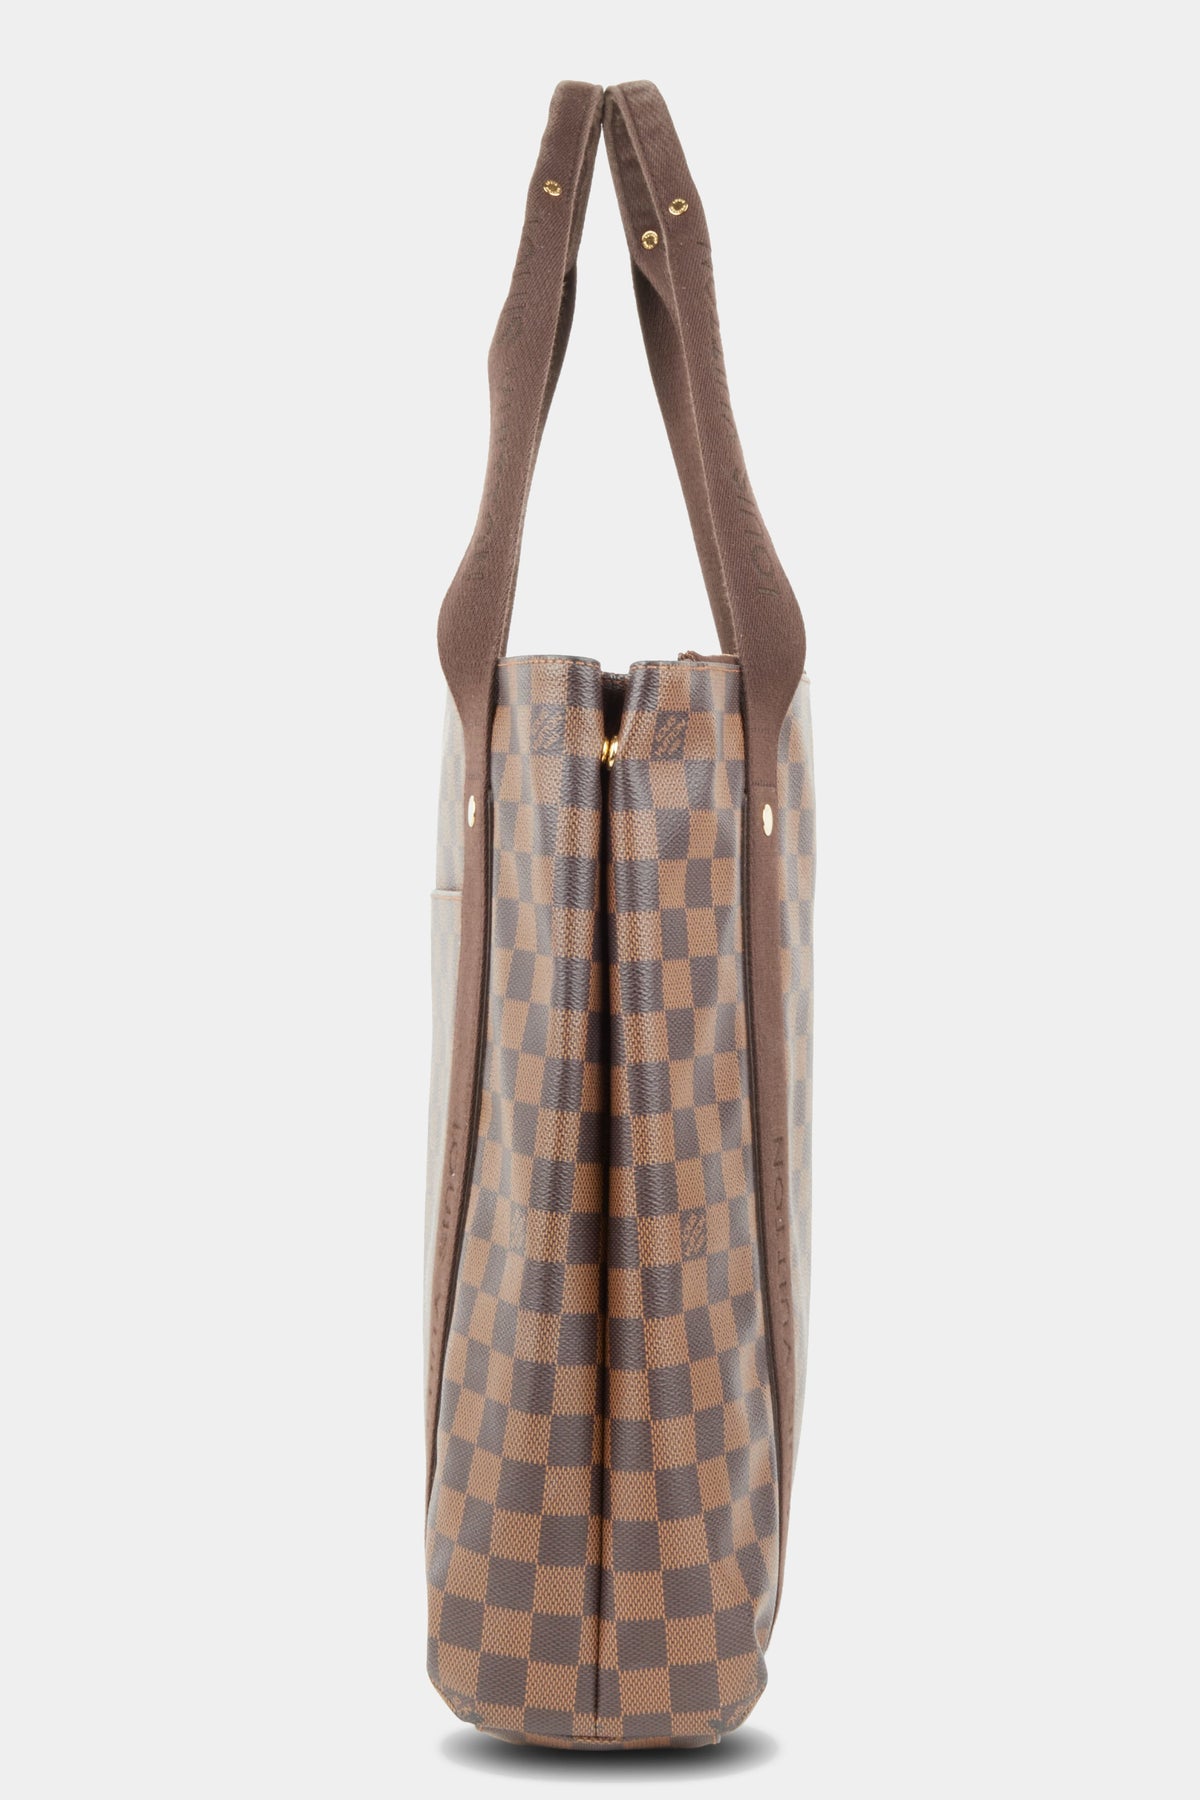 Cabas Beaubourg Damier Ebene Tote Bag – Lord & Taylor